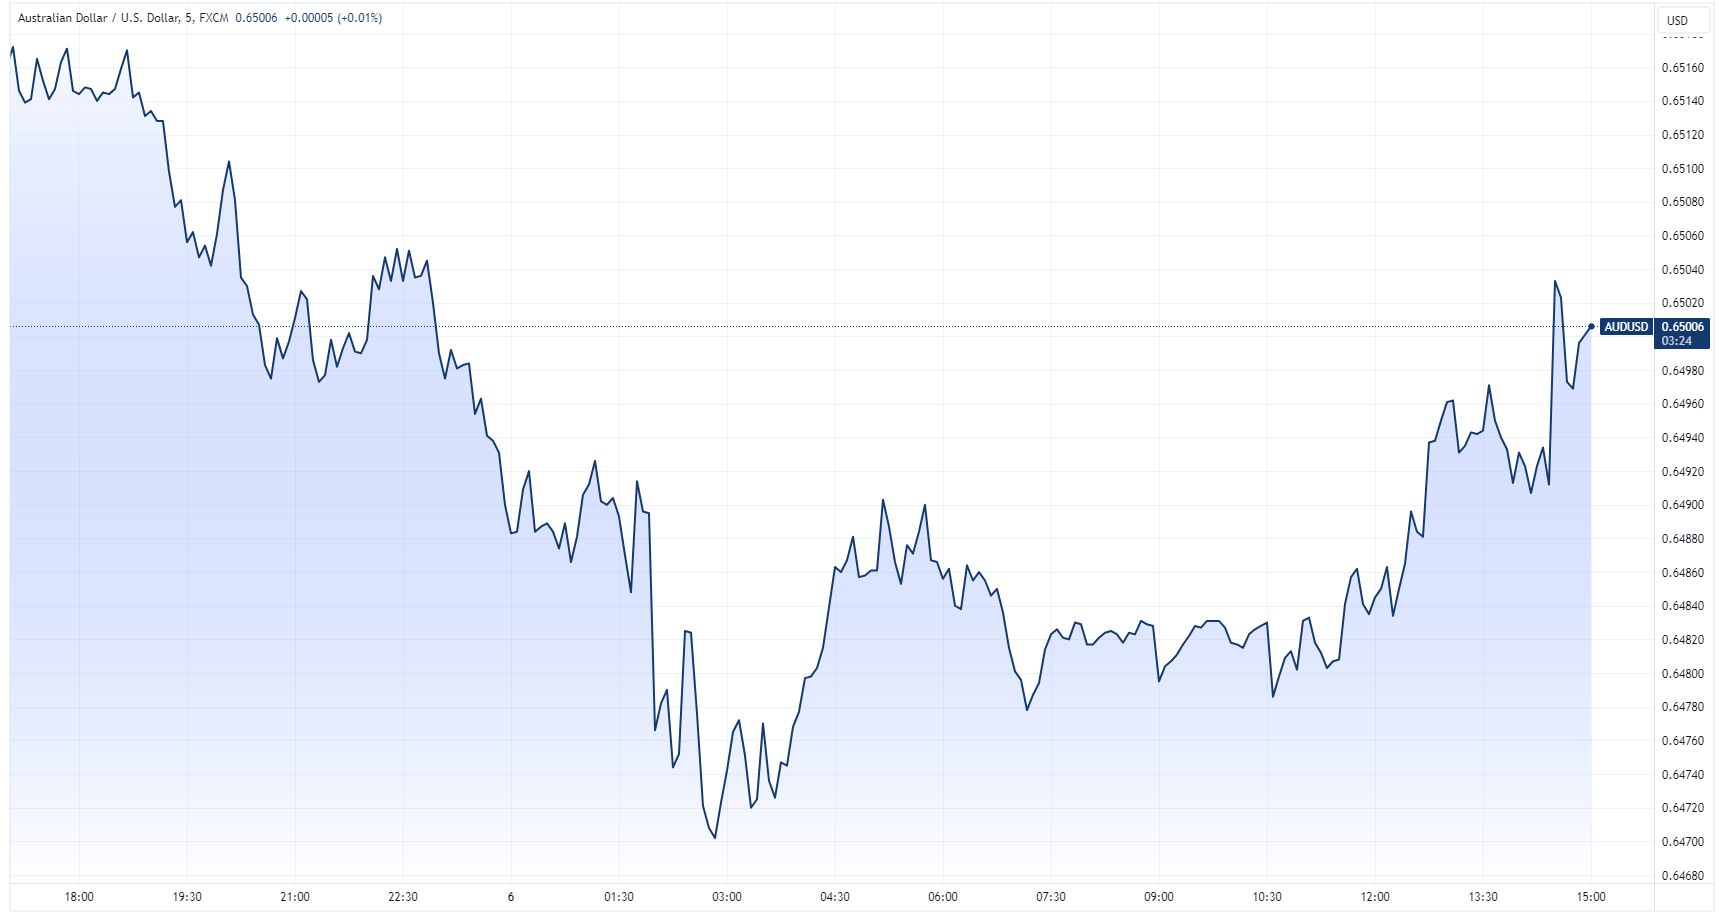 Australian/US Dollar intraday chart for Tuesday, 6 February (Source: TradingView)